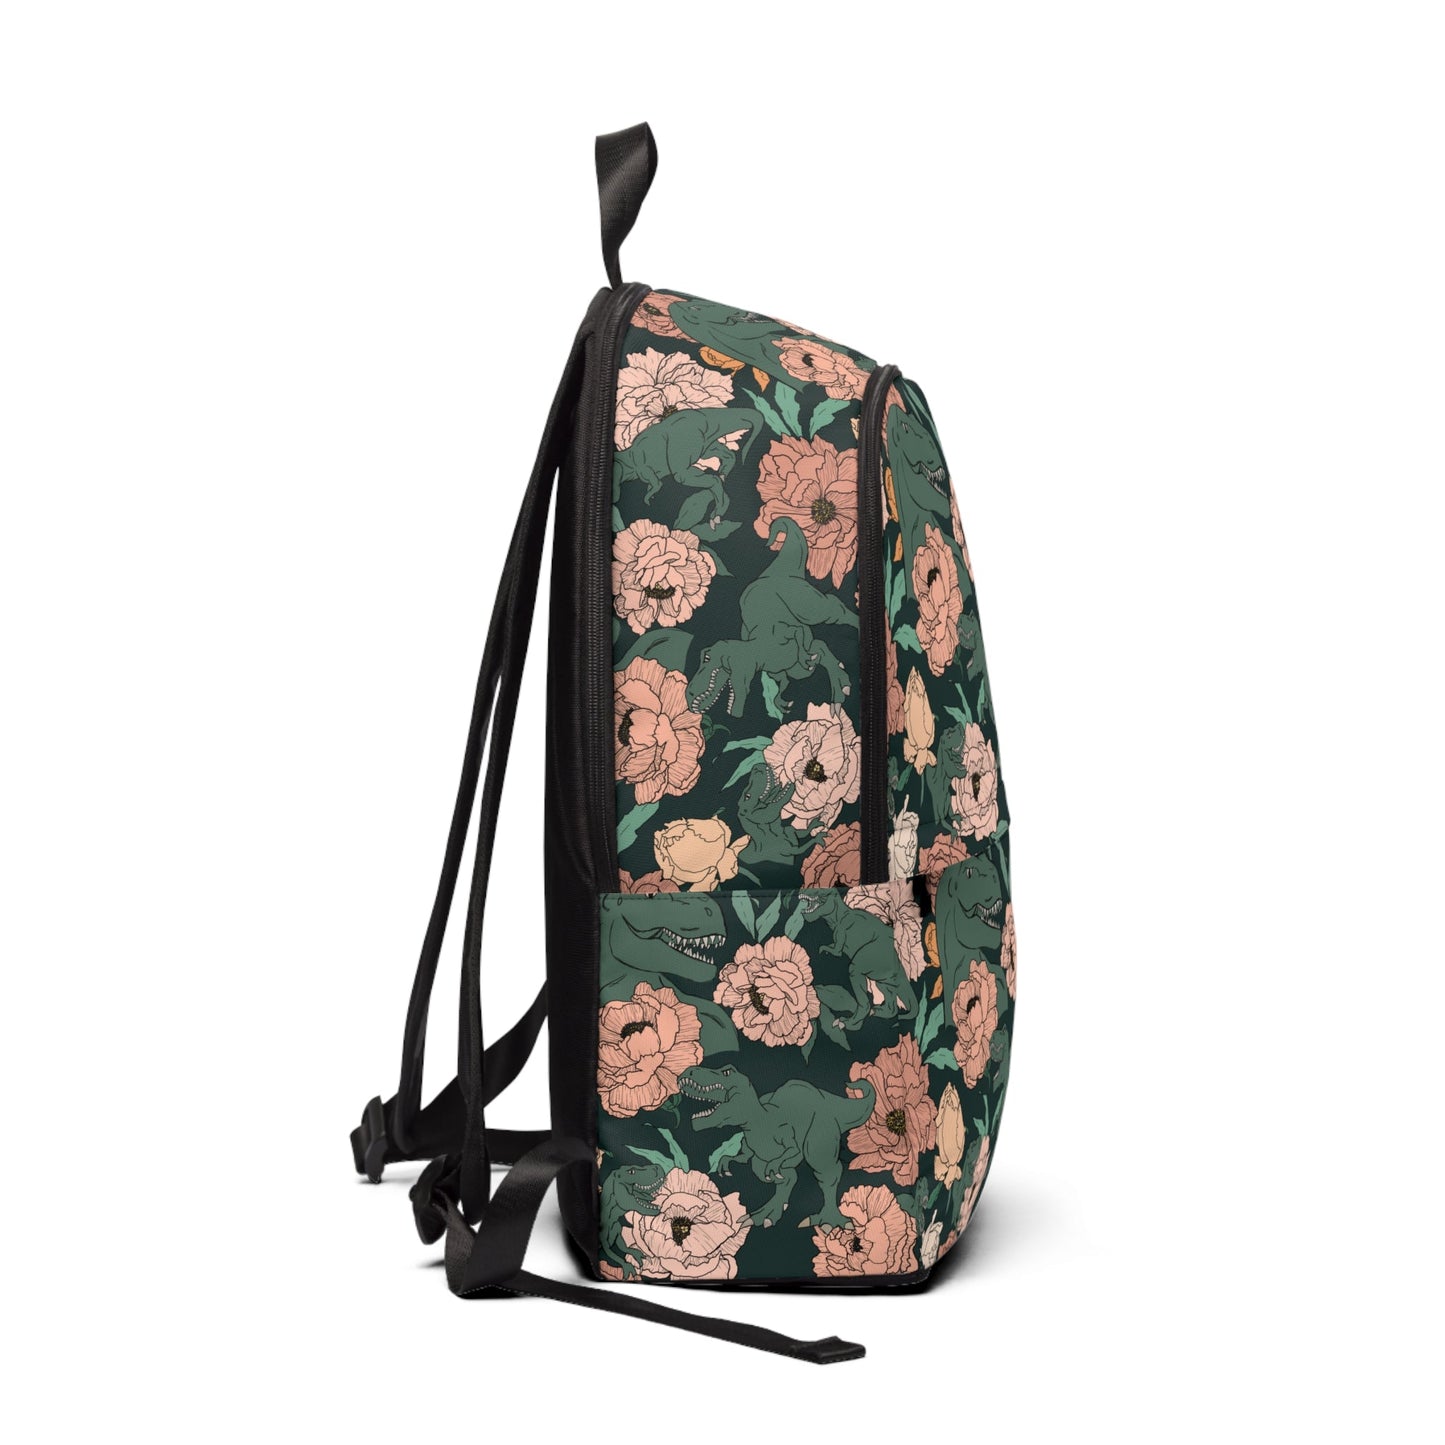 T-Rex and Flowers Backpack - Fox & Joy